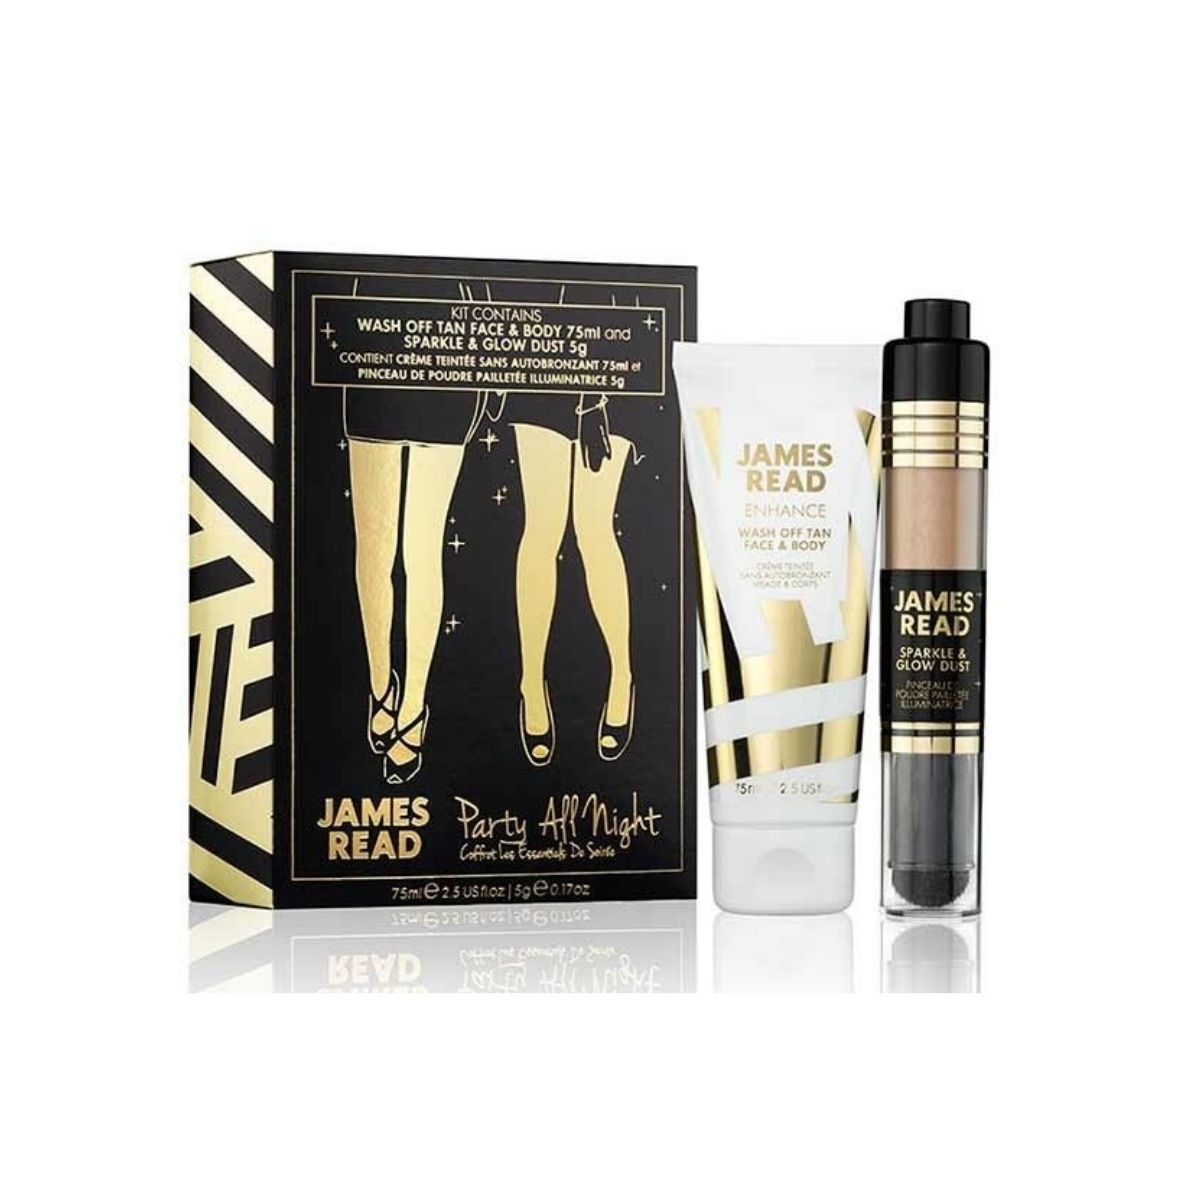 James Read Party All Night Duo Set. 30% OFF